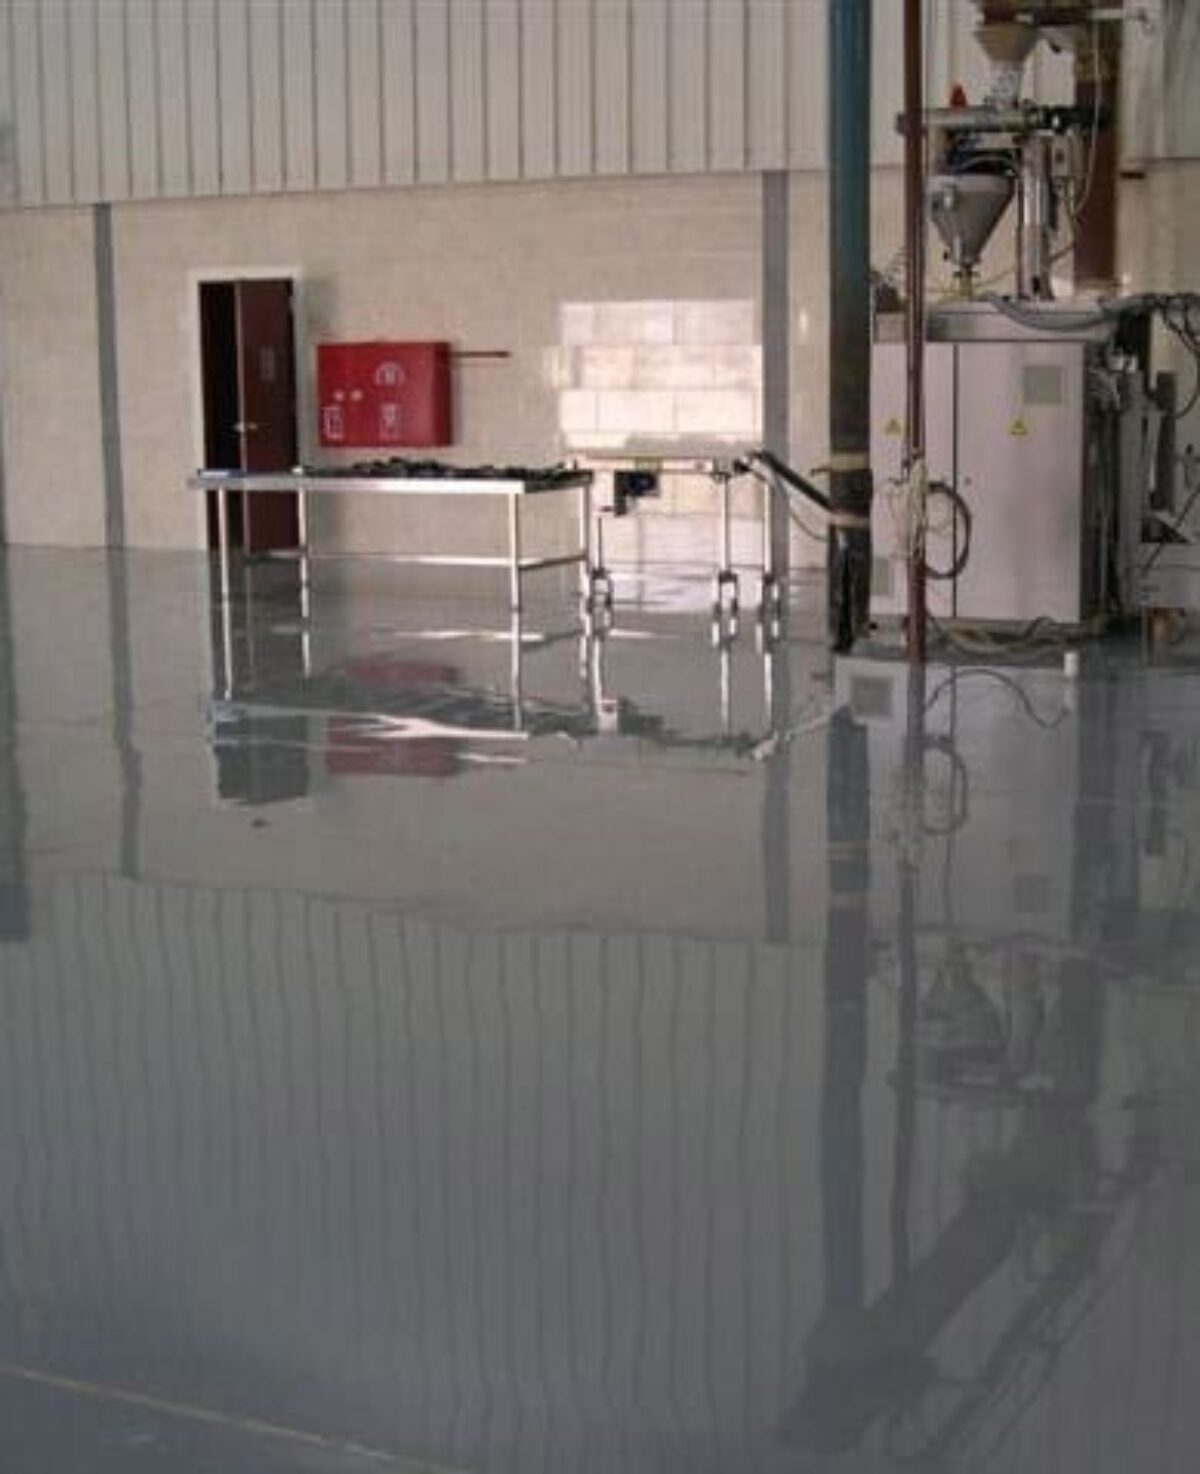 Spiked Shoes for Epoxy Floor Coating | Xtreme Polishing Systems Small